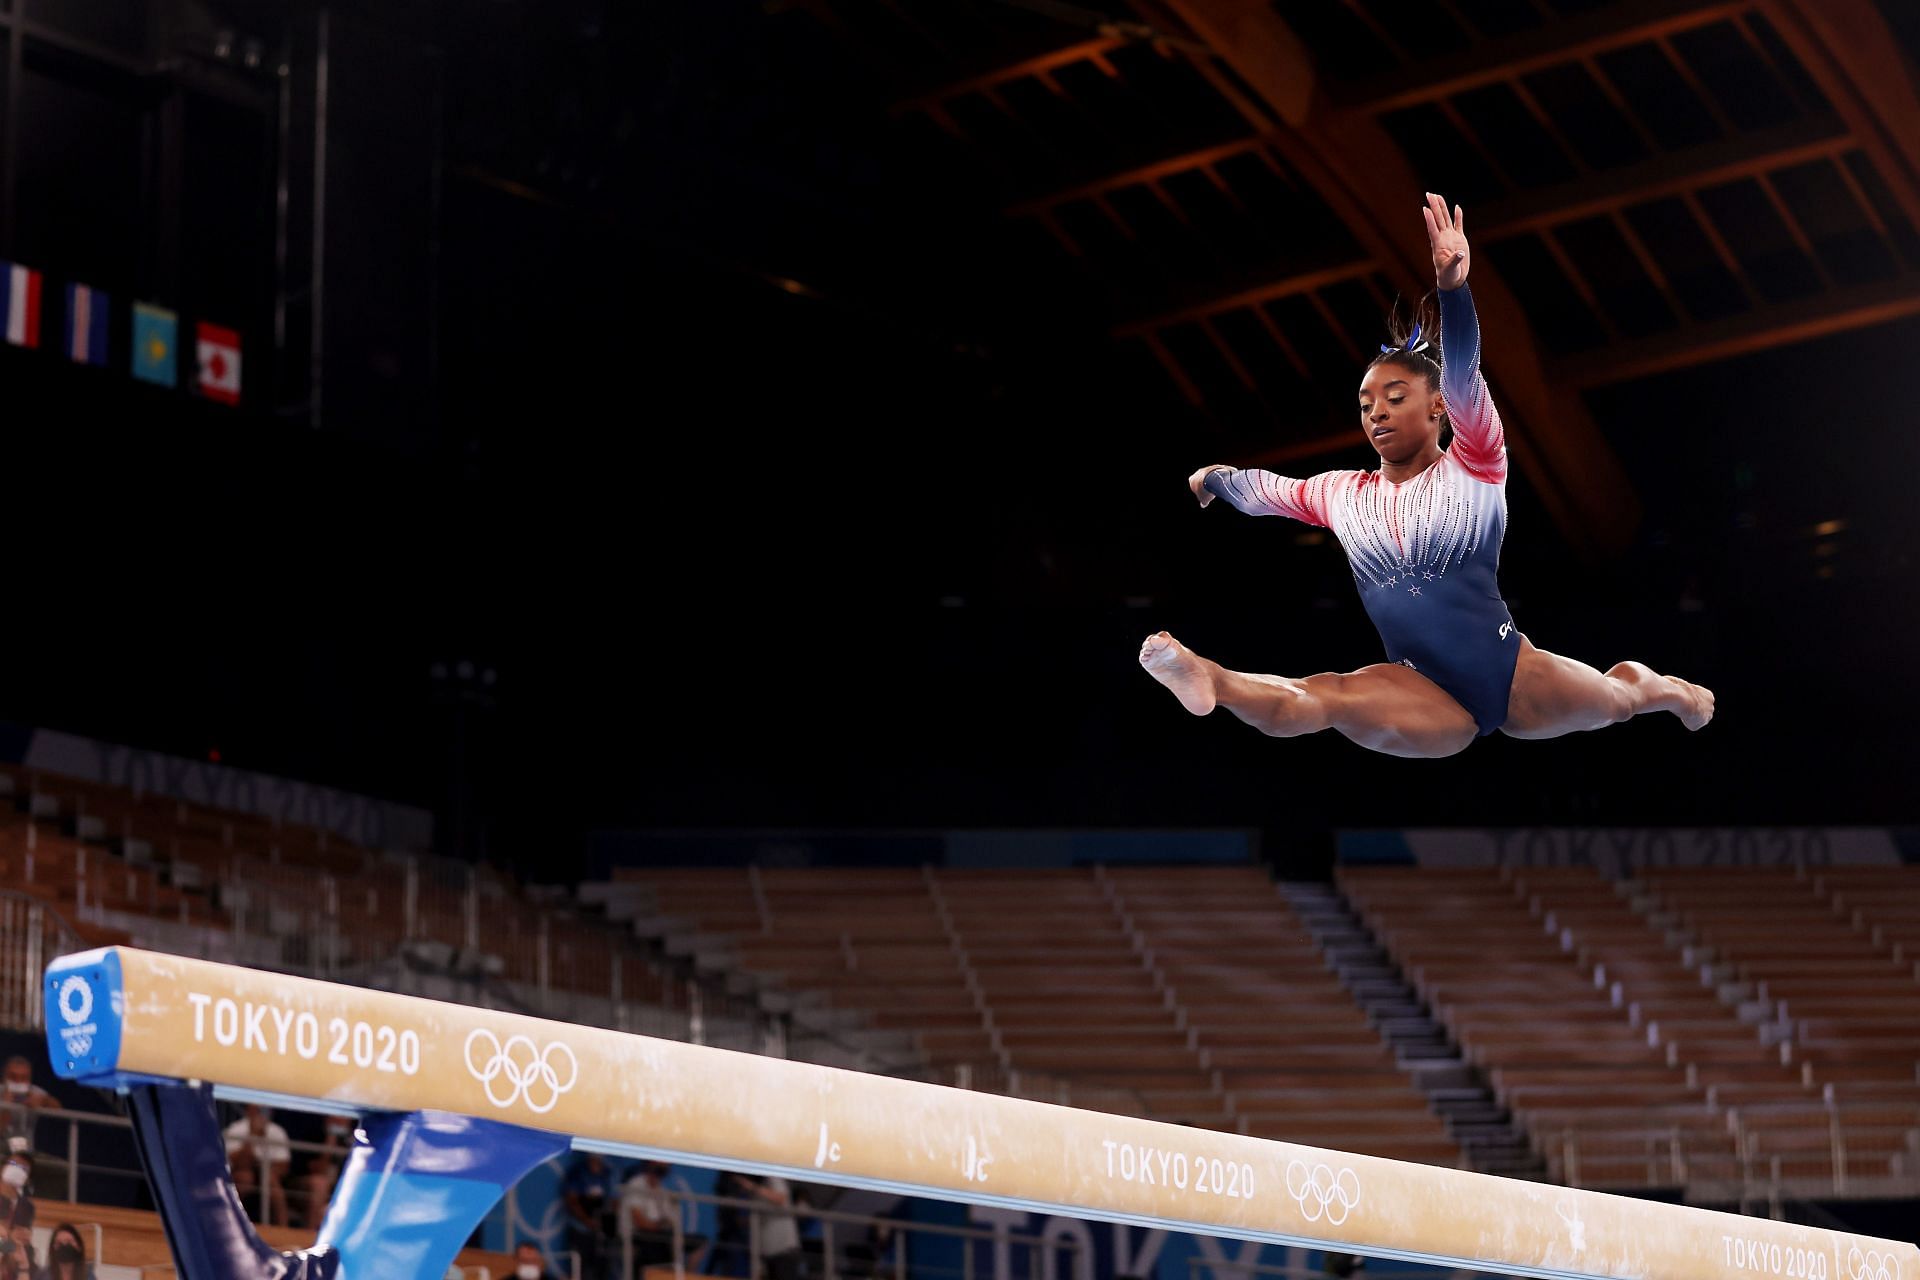 Biles performing her routine at the 2020 Tokyo Olympics (Image via Olympics)